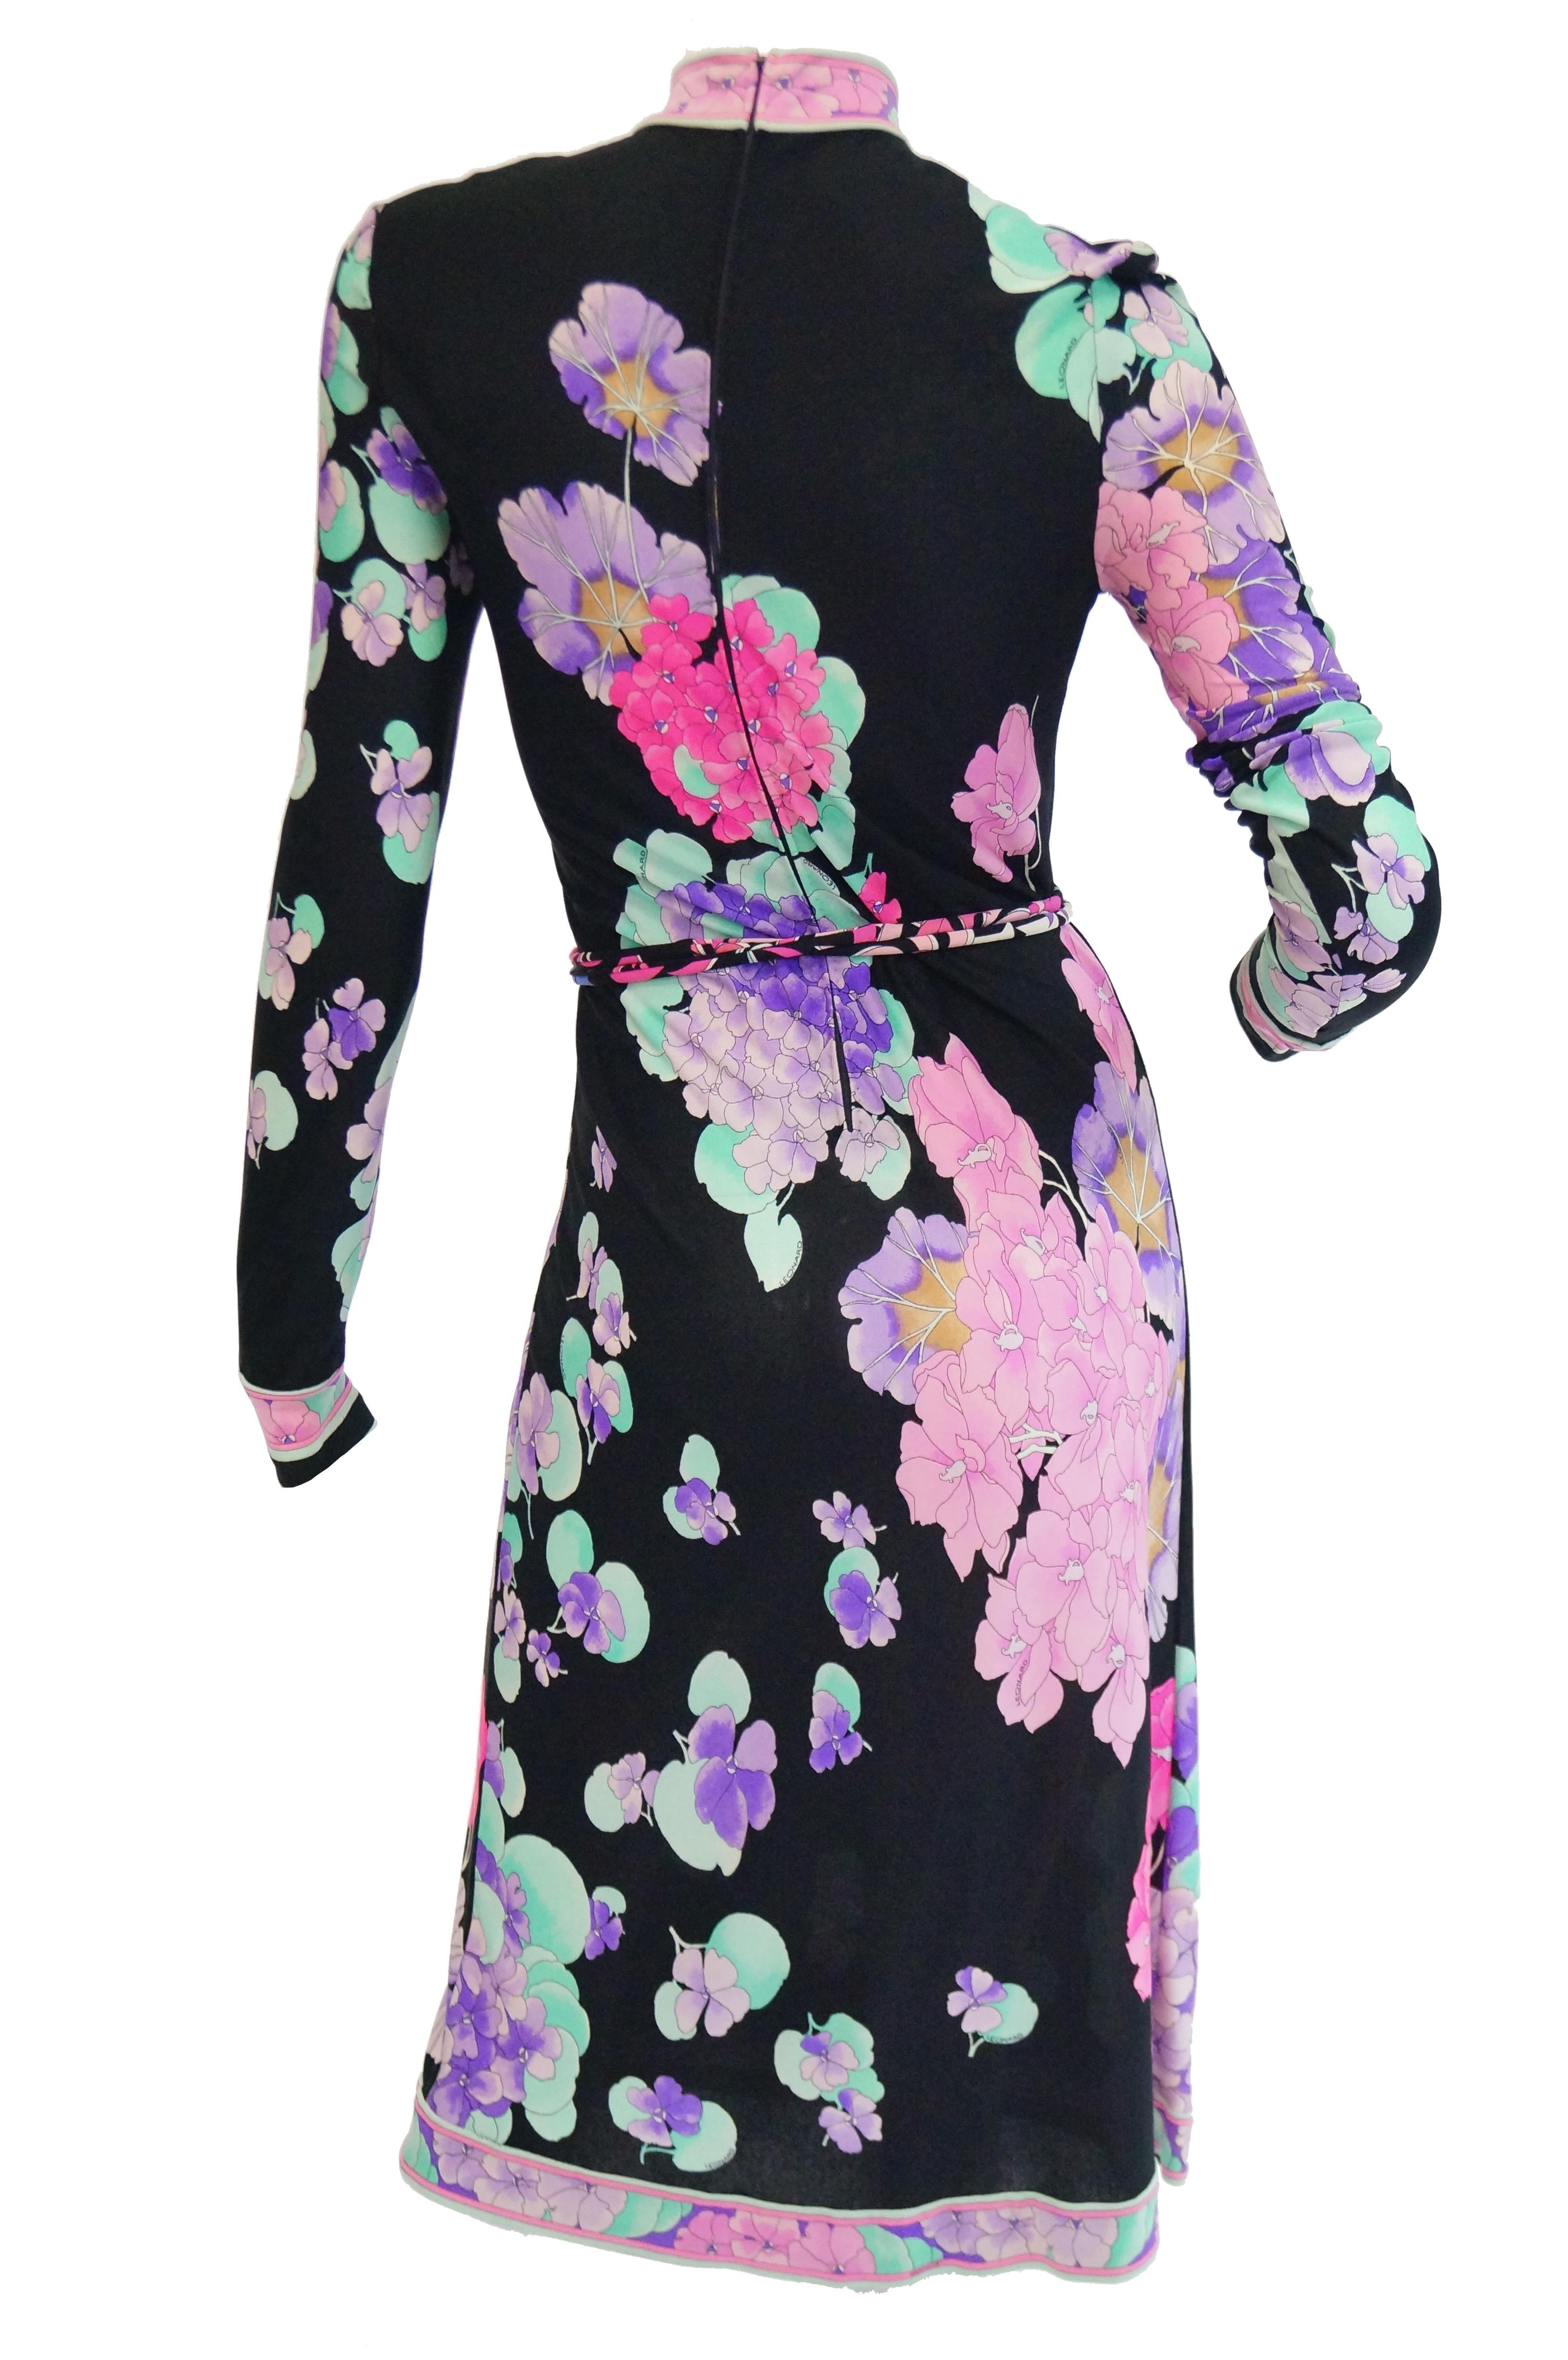 Summer floral midi dress featuring Leonard's signature fabric! Dress has a high neck which brandishes Leonard's classic orchid design that plays well with the negative space of this dress.  The sleeves are long with contrasting floral bands.